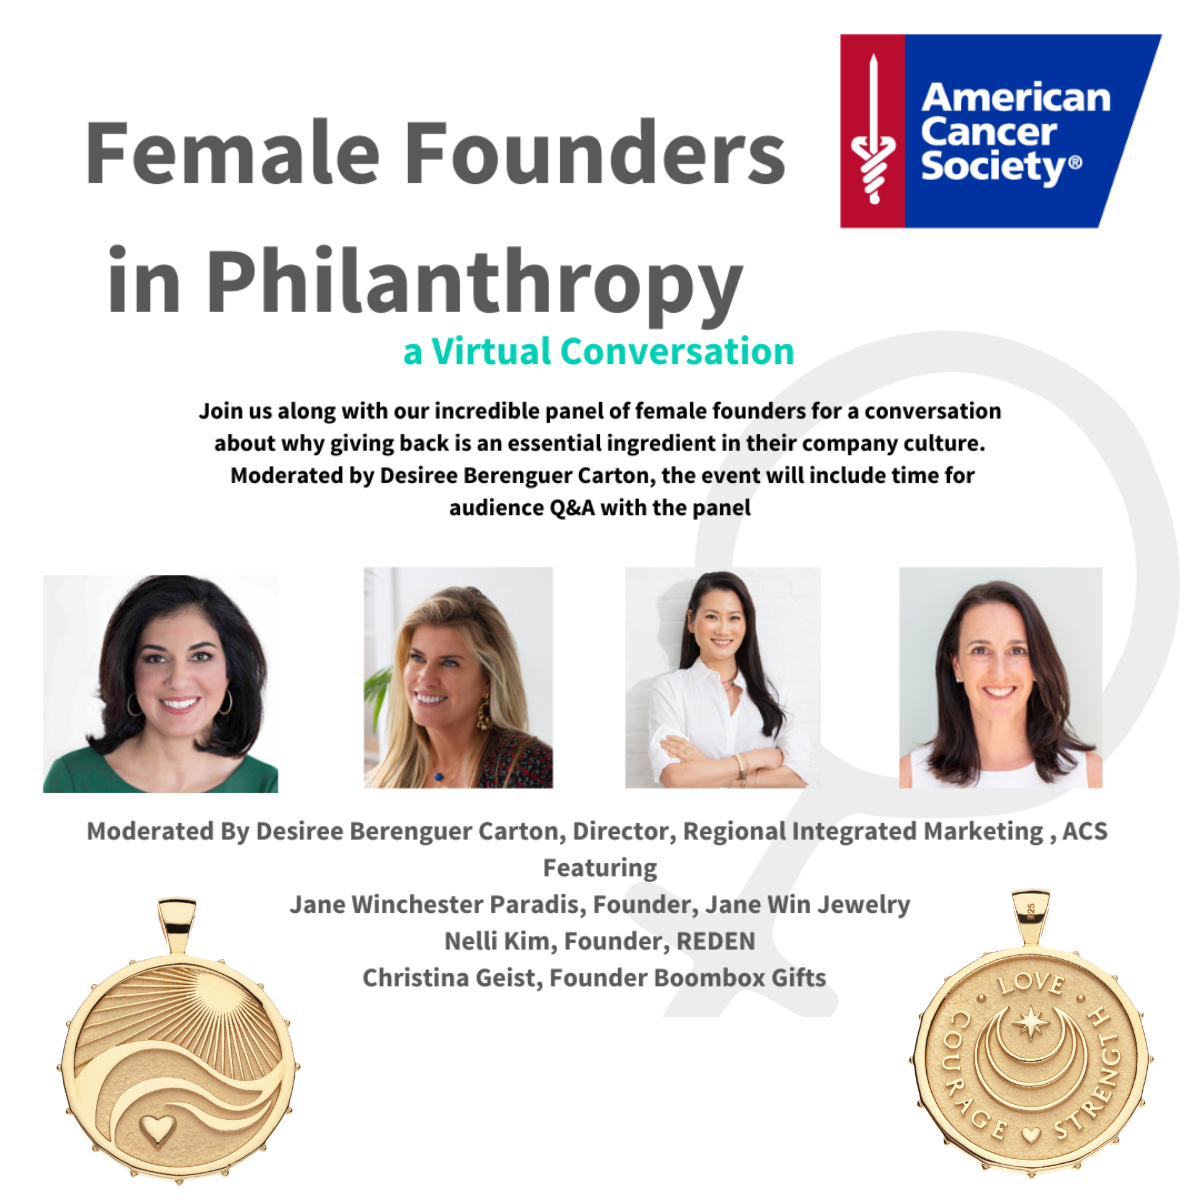 Press Highlight: Jane featured on American Cancer Society's Female Founders in Philanthropy Panel